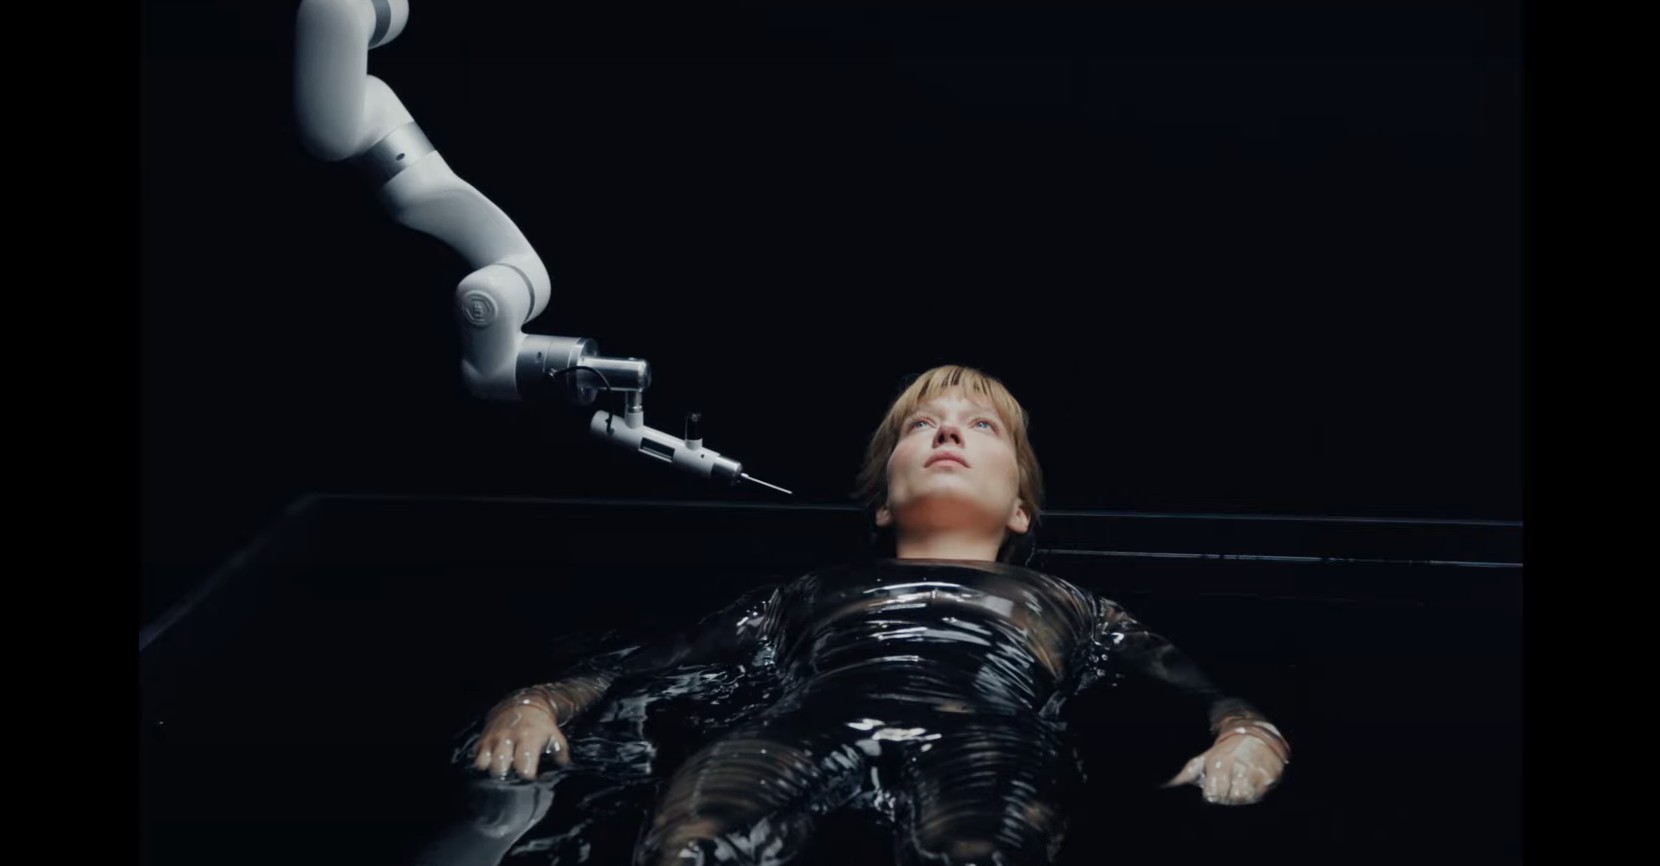 A woman is probed by a machine in The Beast.